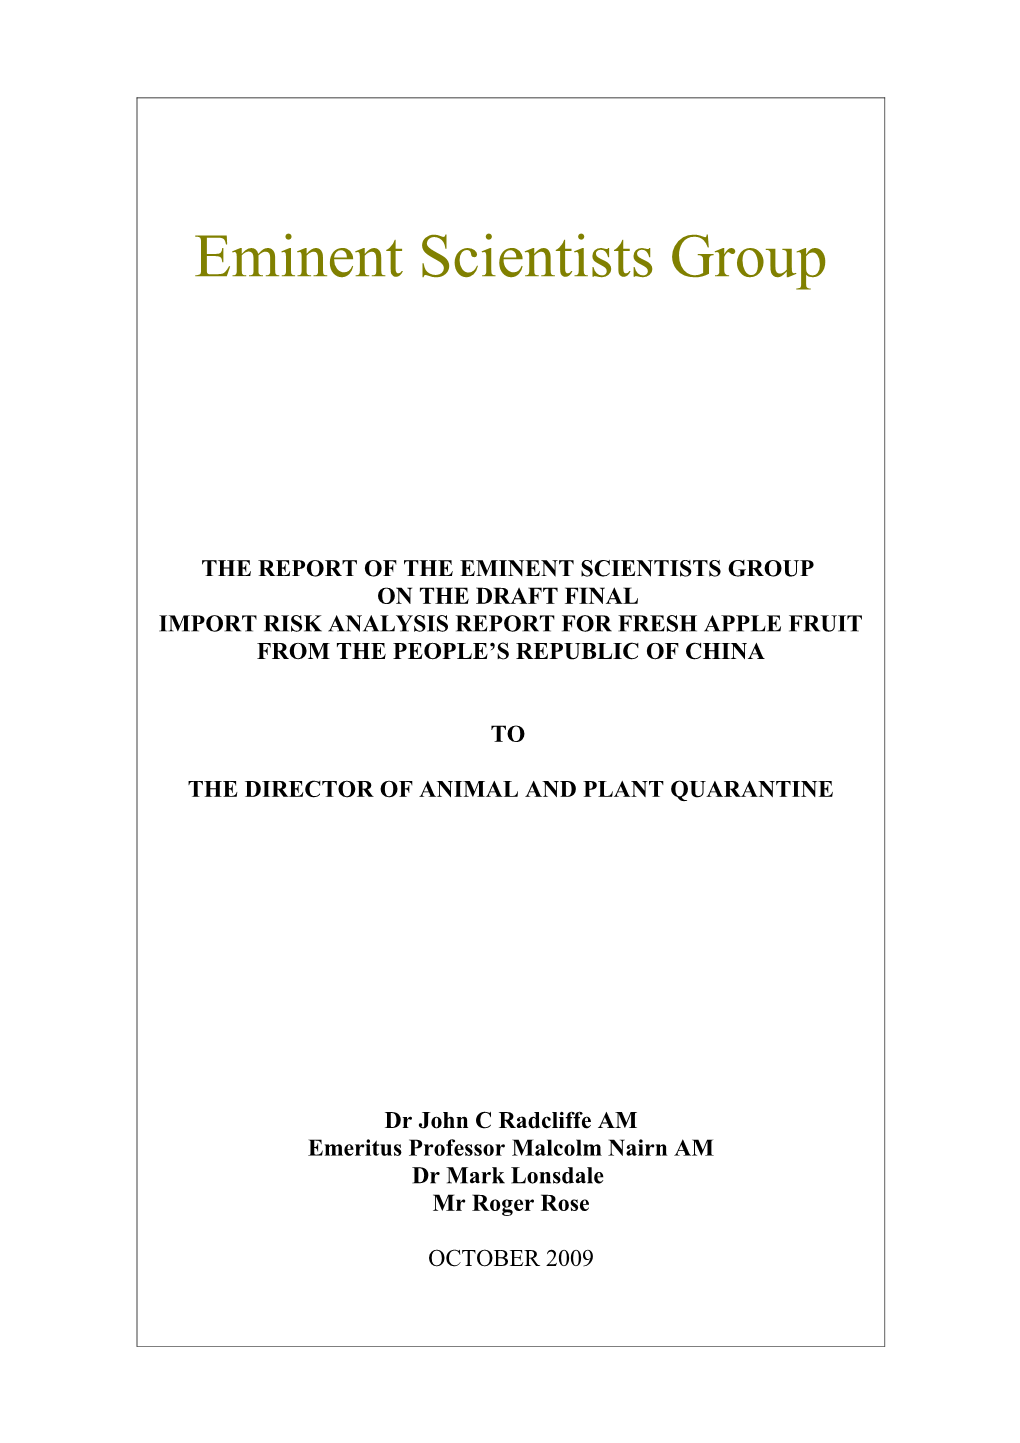 The Report of the Eminent Scientists Group